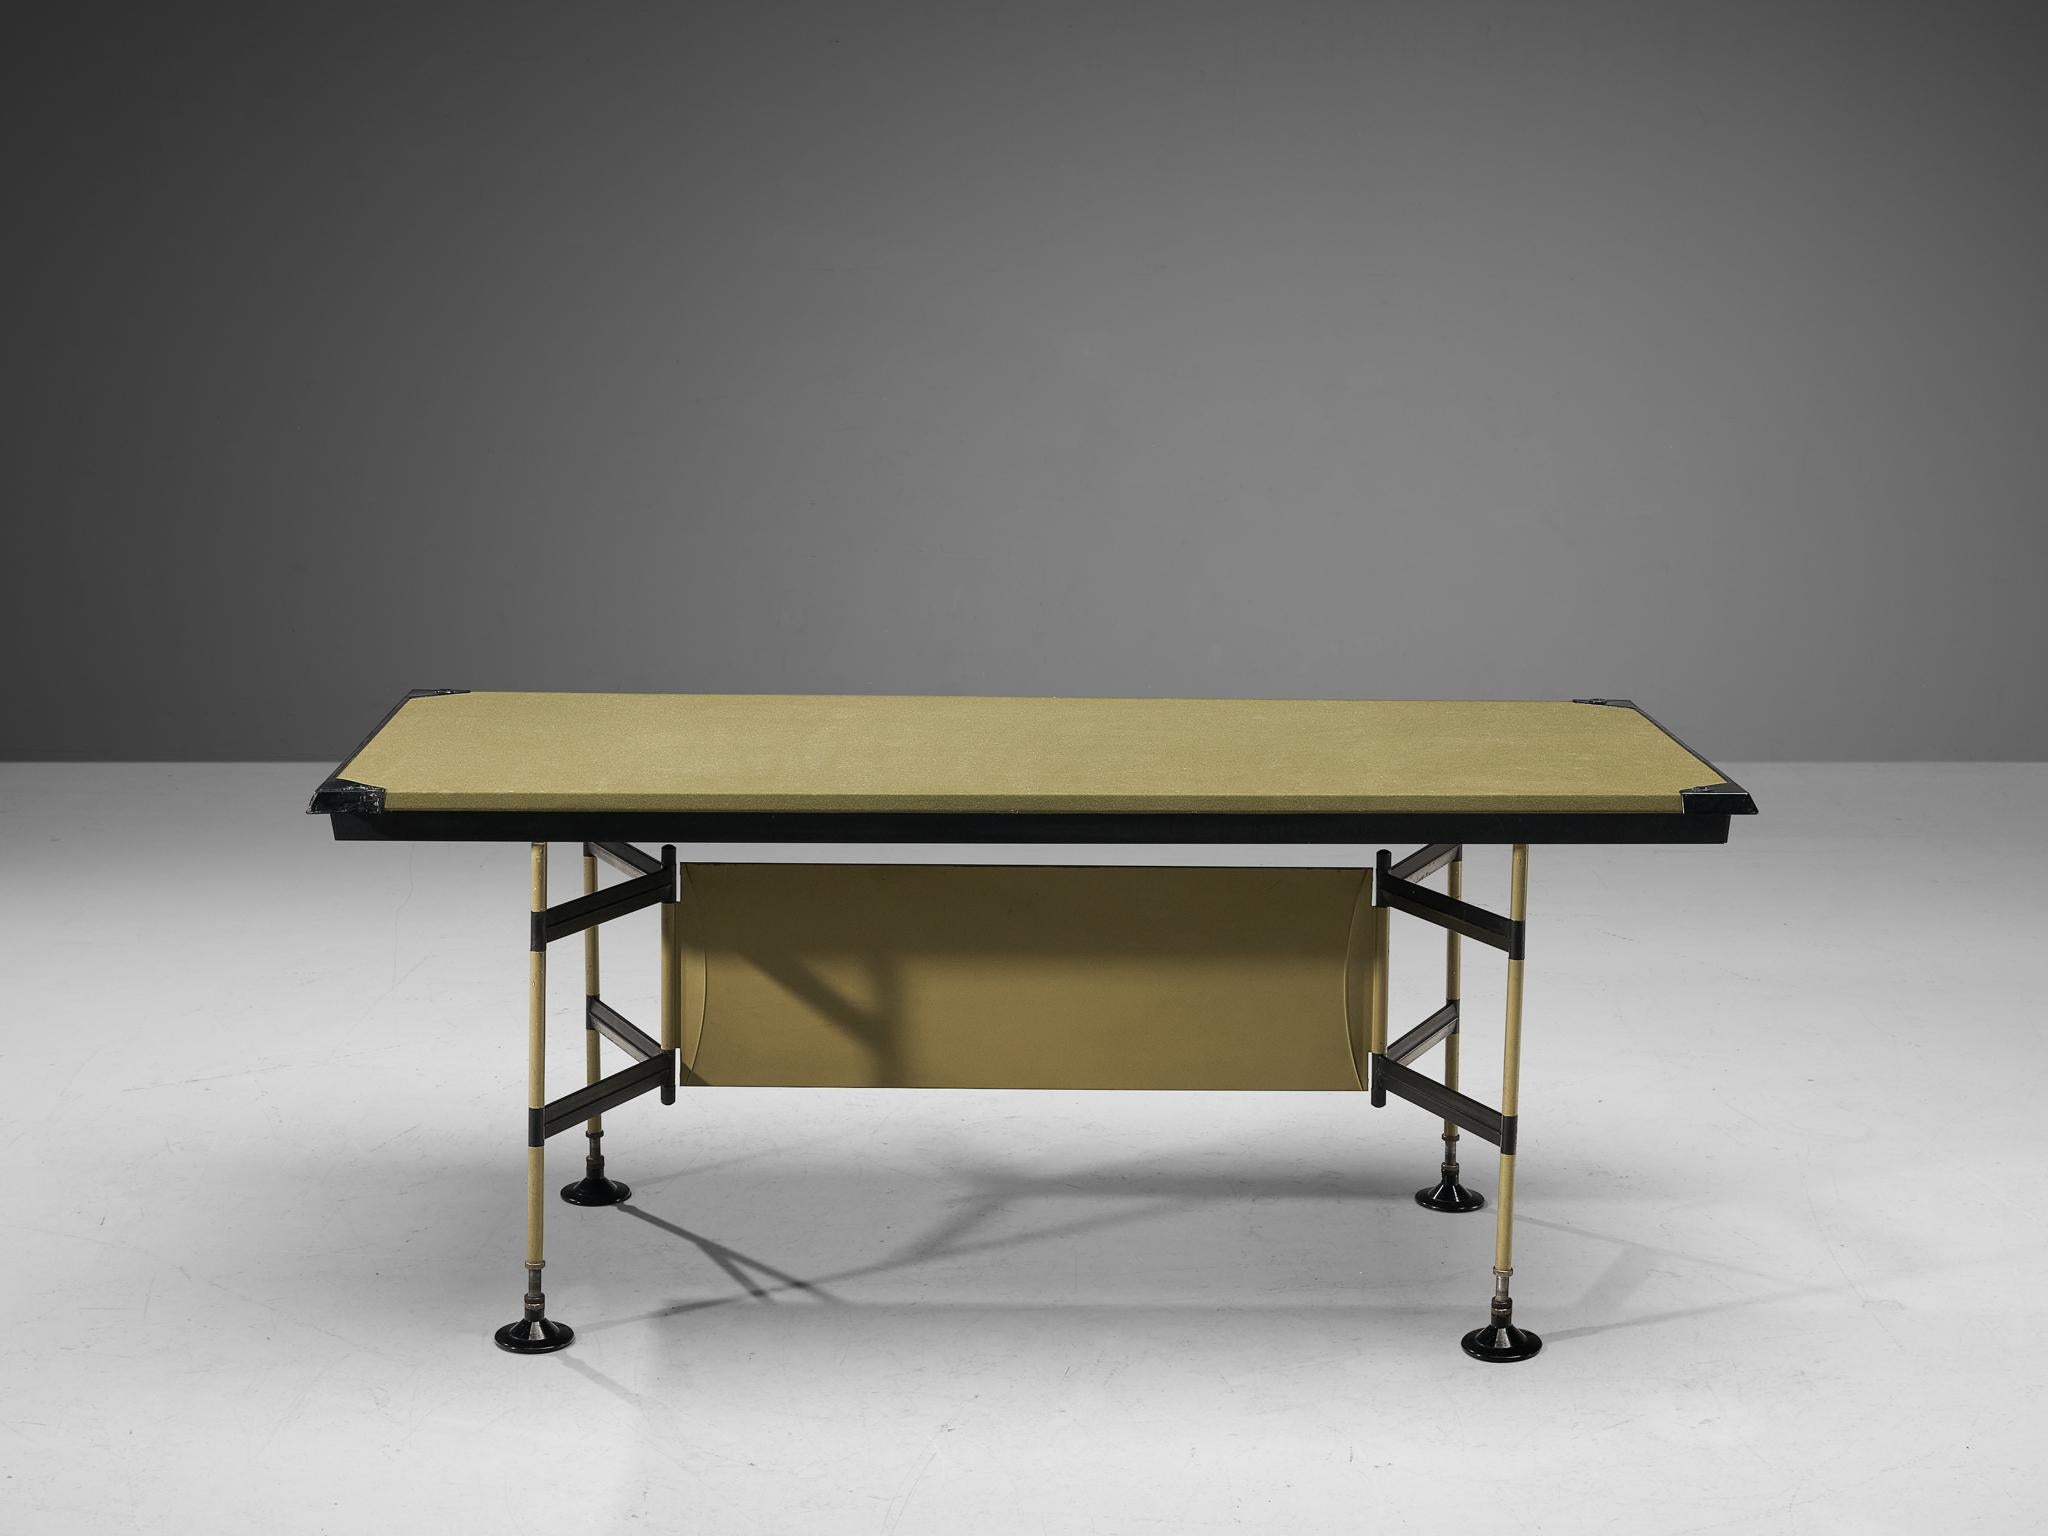 Studio BBPR for Olivetti, 'Spazio' table, steel, fabric, vinyl, plastic, Italy, design 1959/60, production 1960s 

In 1954, Olivetti, the Italian office equipment manufacturer, hired BBPR to design their New York showroom on Fifth Avenue and to